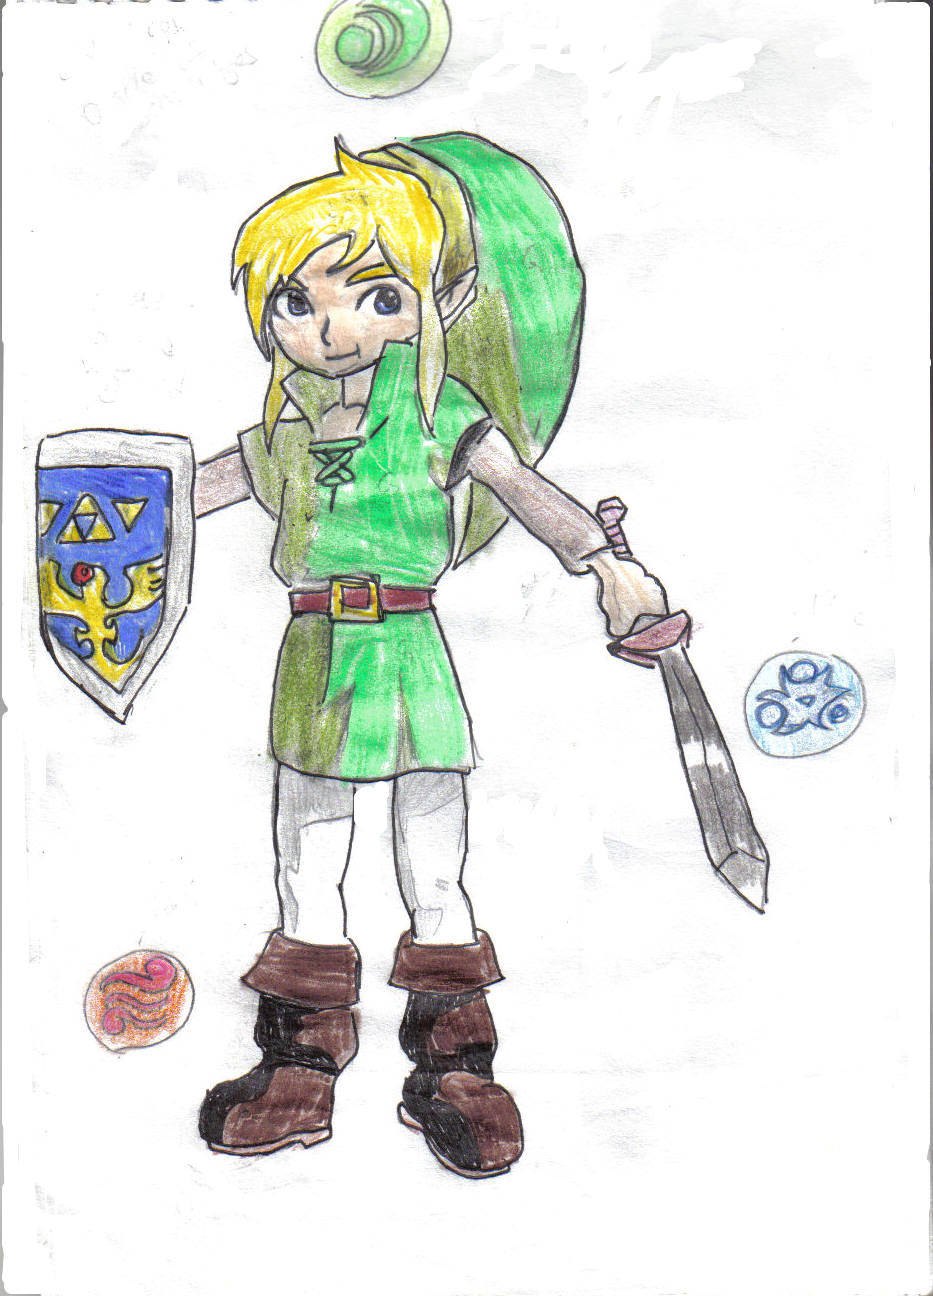 Link from oracle of seasons/ages by Linklover91